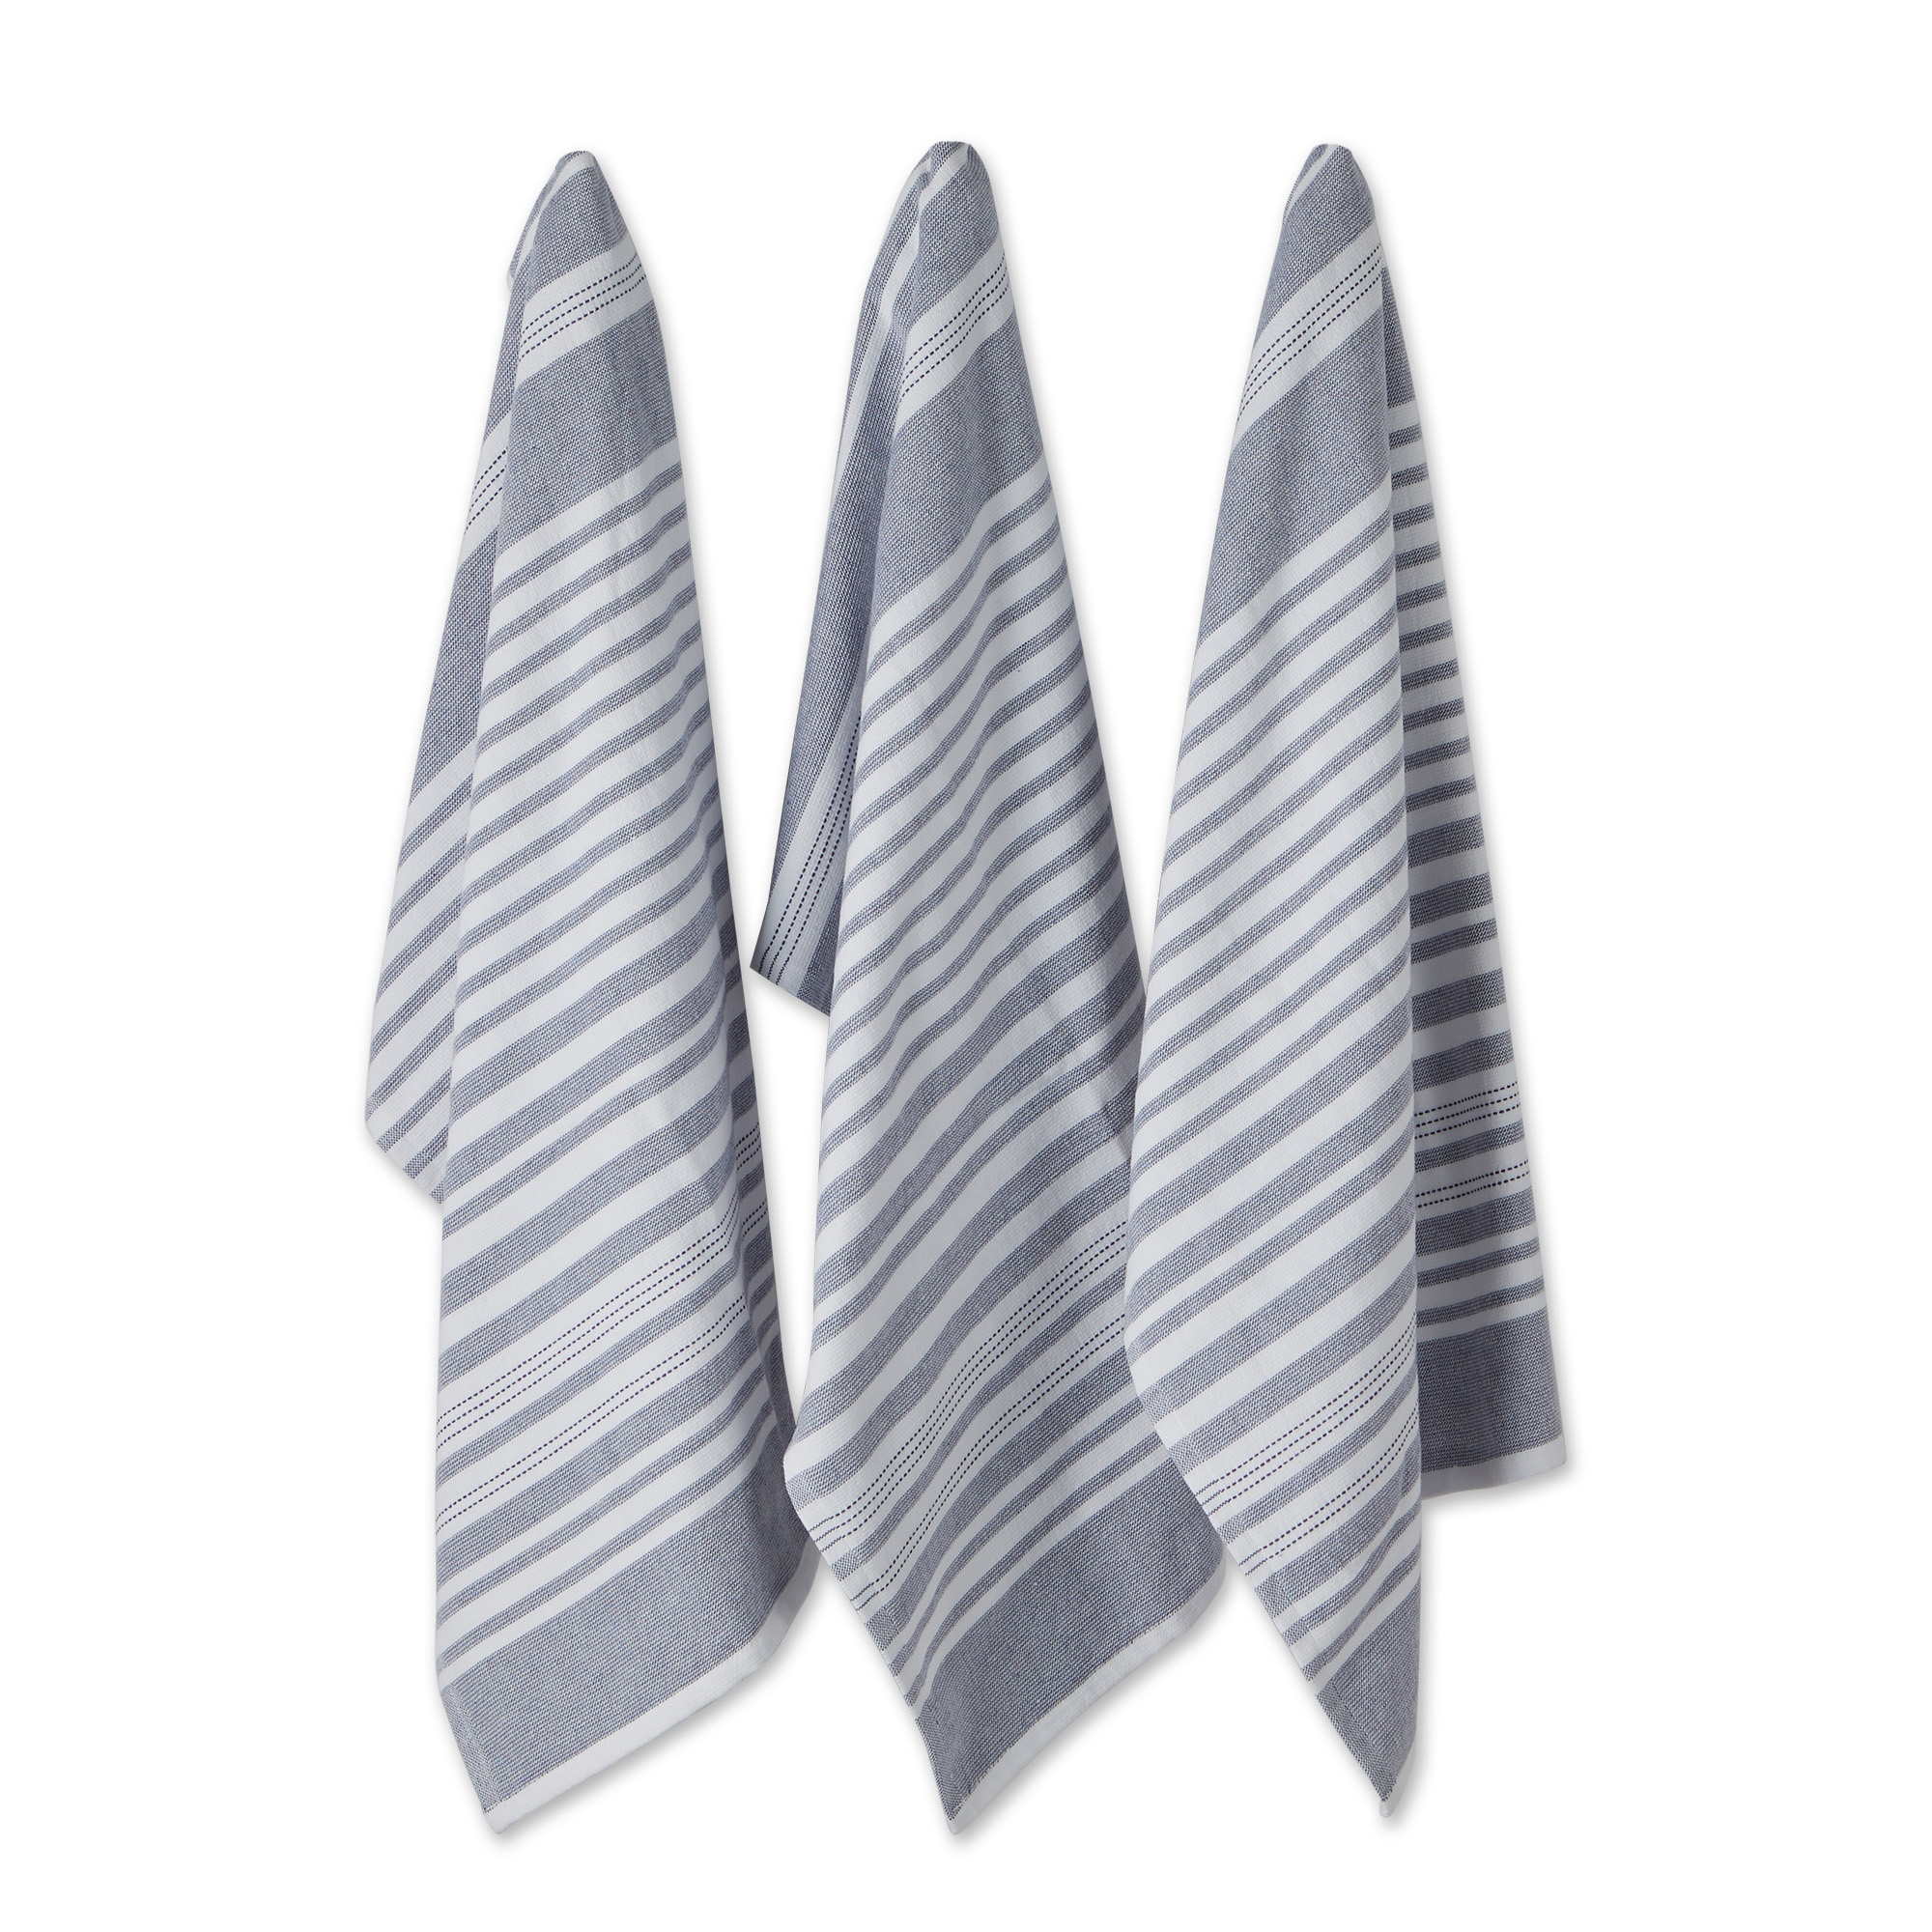 Contemporary Home Living Set of 3 White and French Blue French Terry Variegated Stripe Dish Towel, 28"